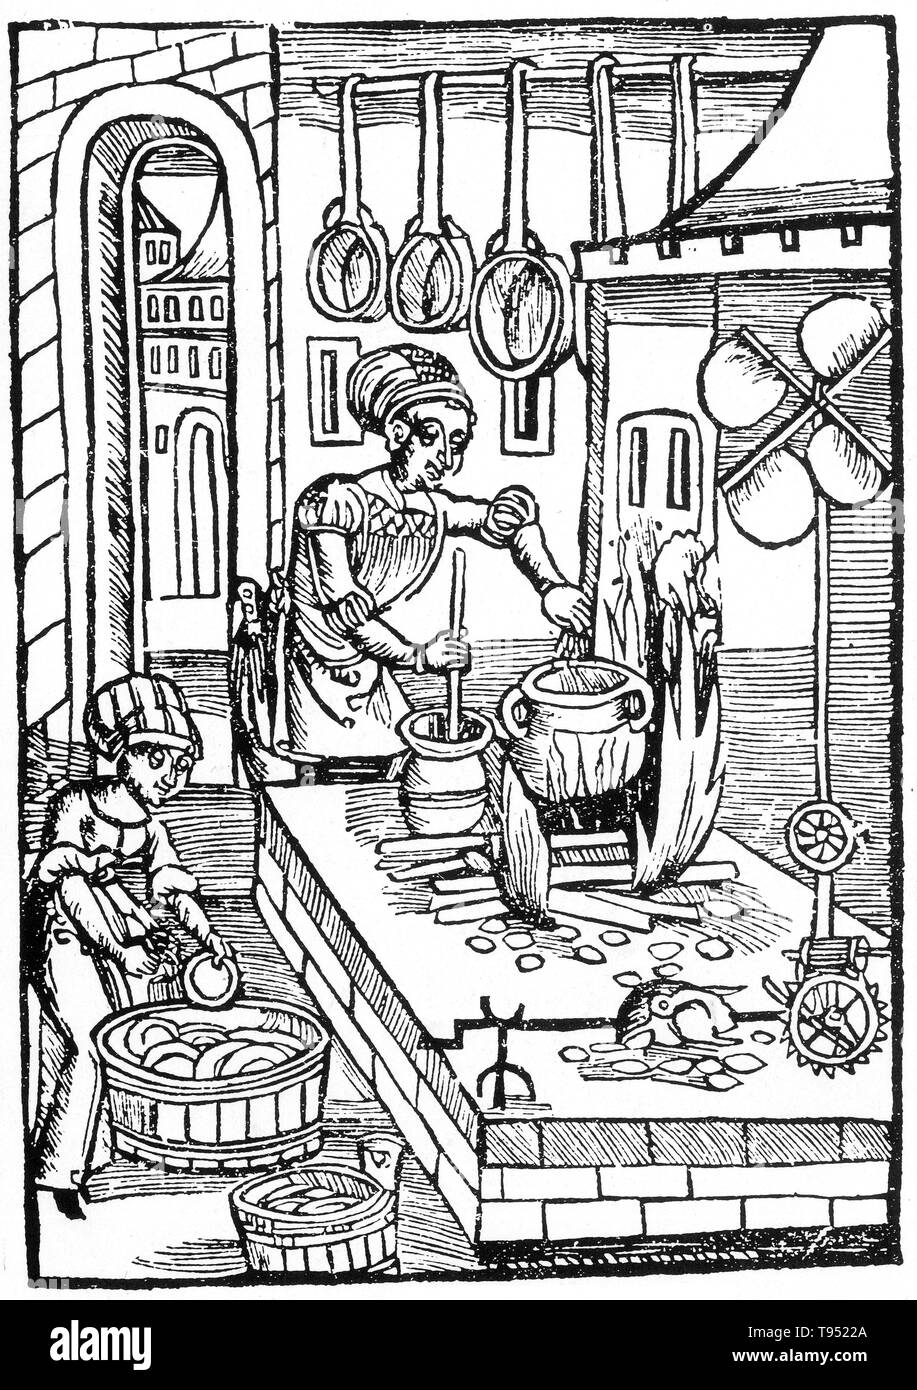 In most medieval households, cooking was done on an open hearth in the middle of the main living area, to make efficient use of the heat. This was the most common arrangement, even in wealthy households, where the kitchen was combined with the dining hall. Towards the Late Middle Ages a separate kitchen area began to evolve. Stock Photo